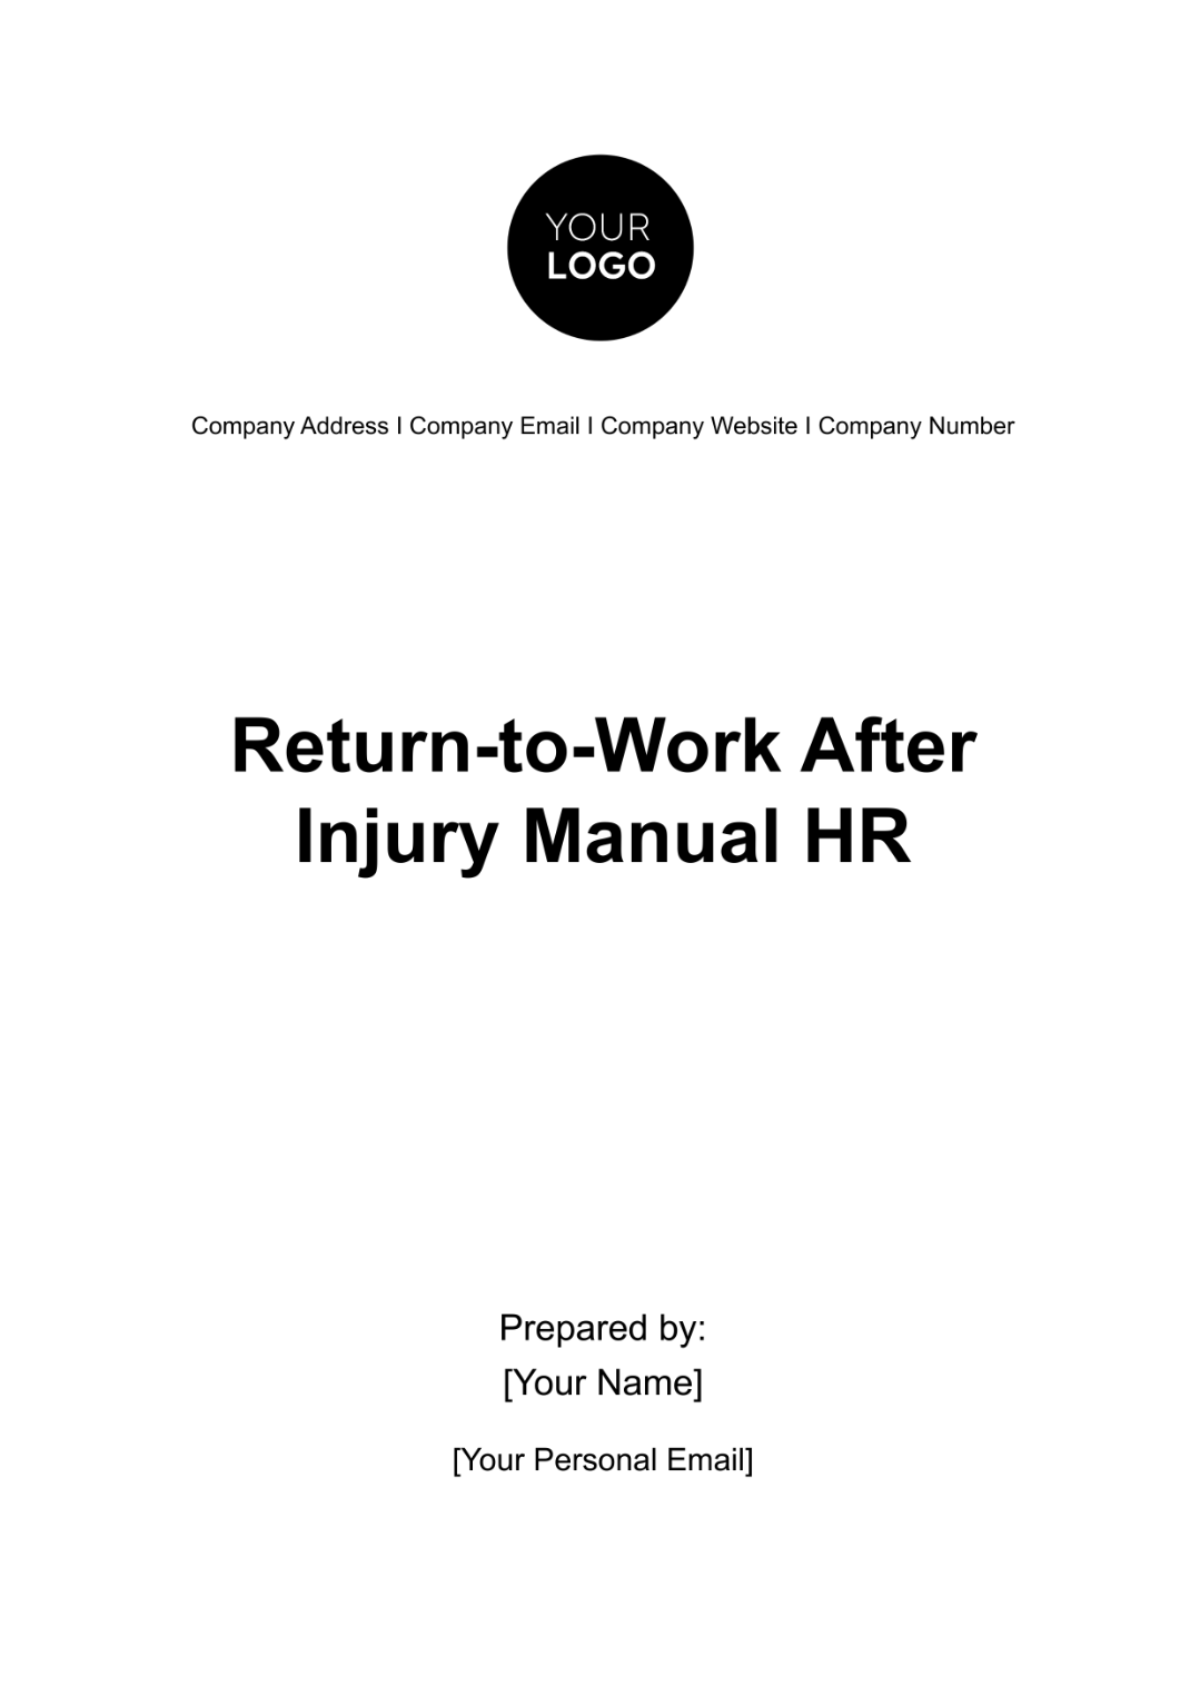 Free Return-to-Work After Injury Manual HR Template